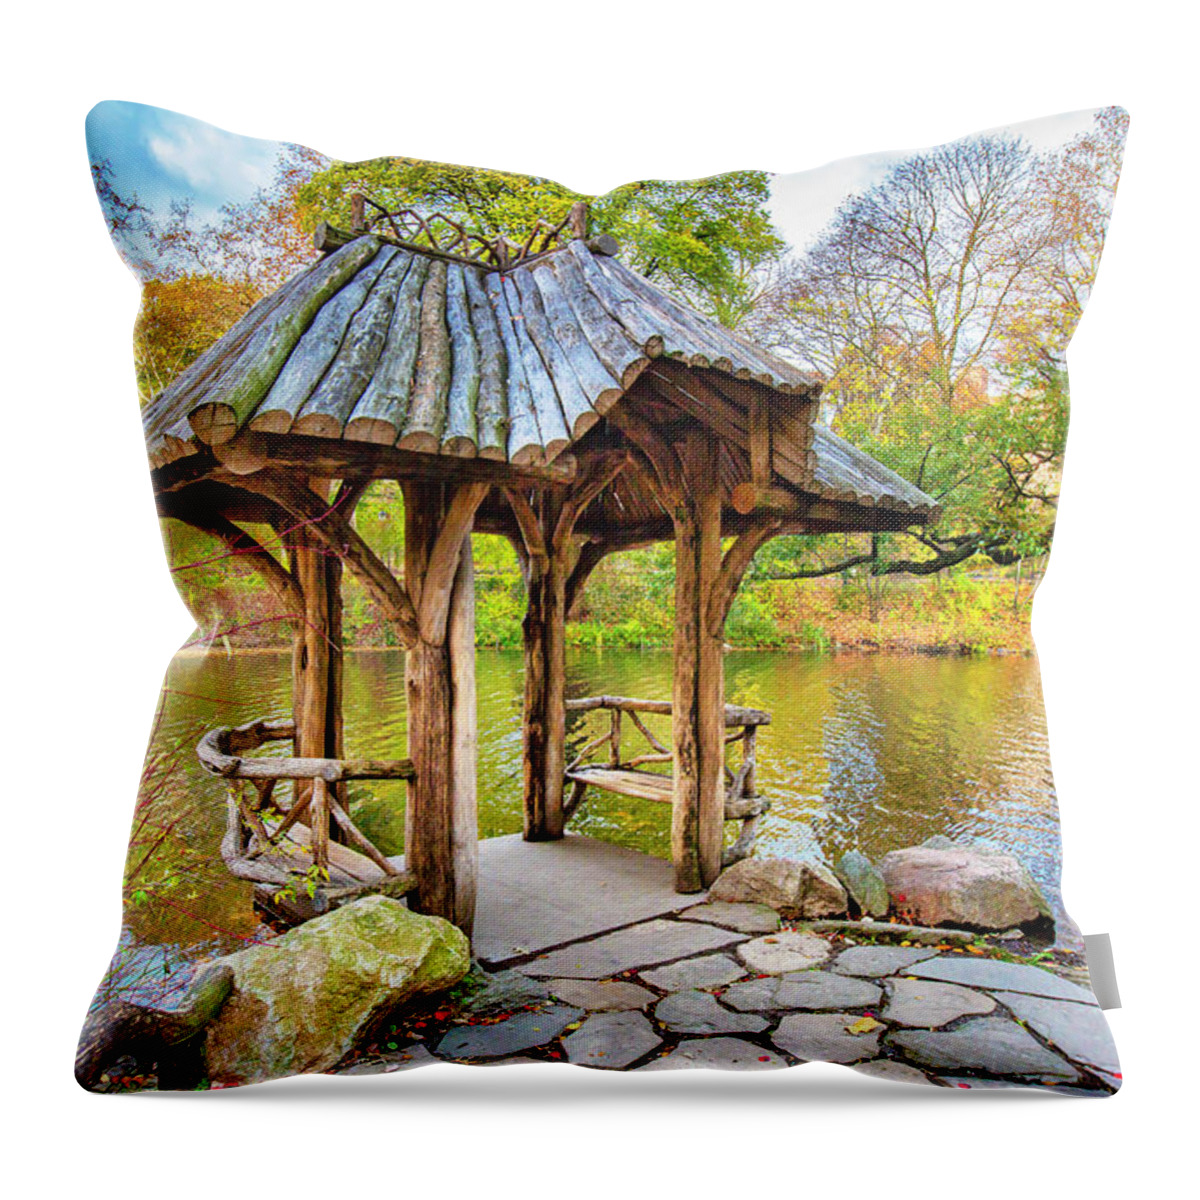 Estock Throw Pillow featuring the digital art Wagner Cove In Central Park, Nyc by Claudia Uripos